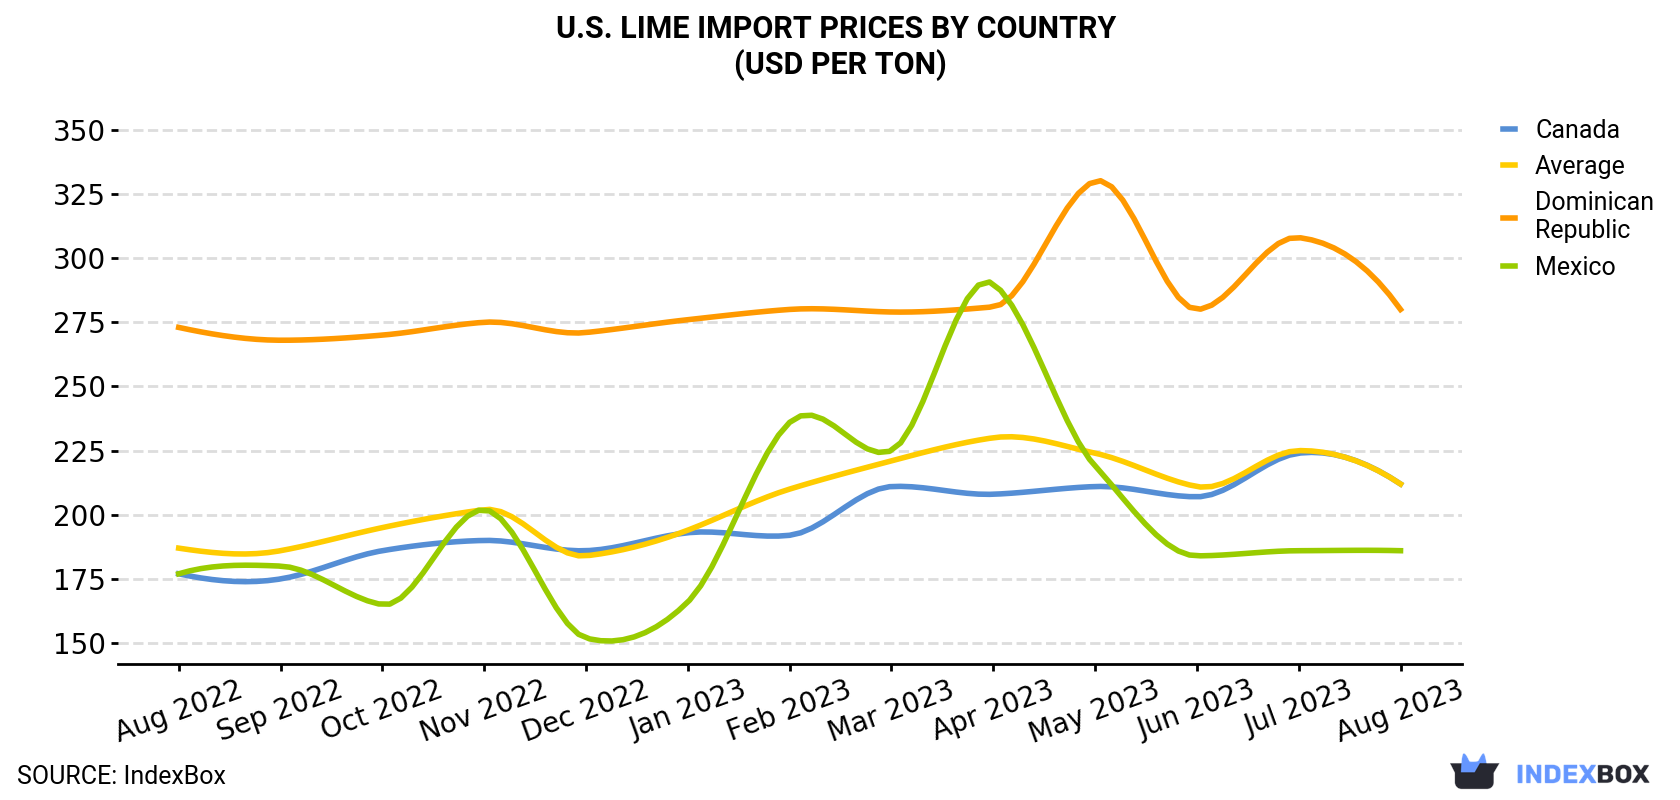 U.S. Lime Import Prices By Country (USD Per Ton)